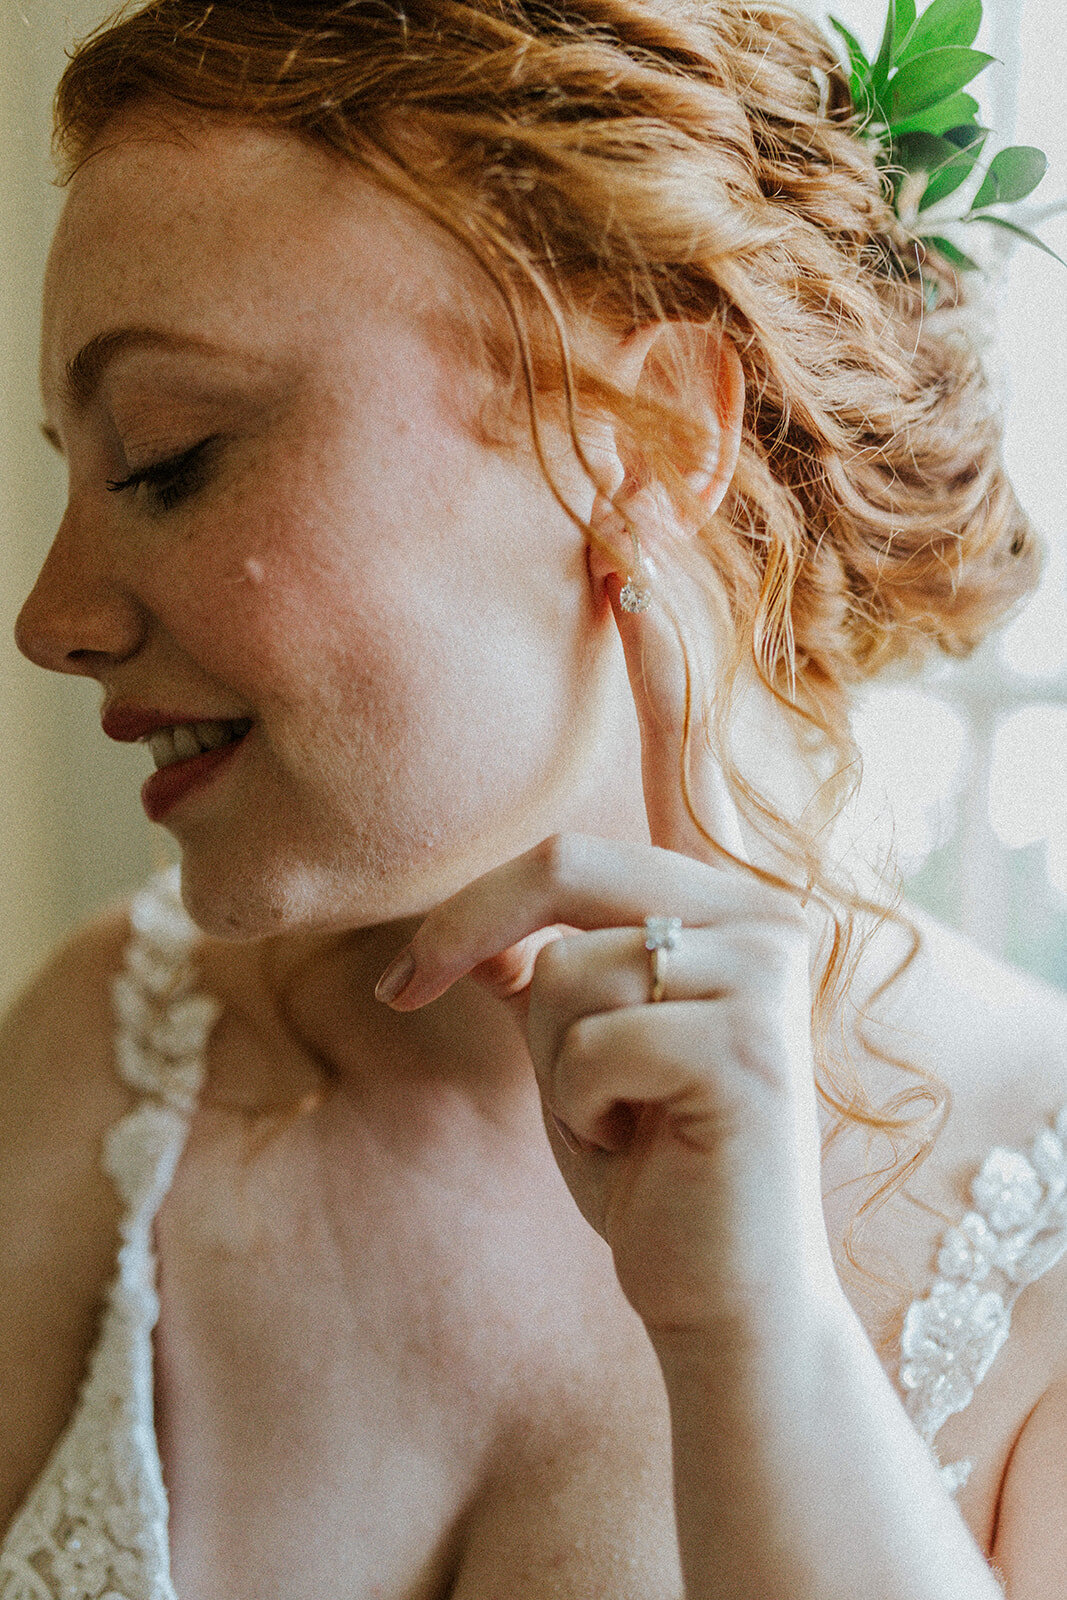 A woman in a white lace dress models her dainty earrings on her wedding day